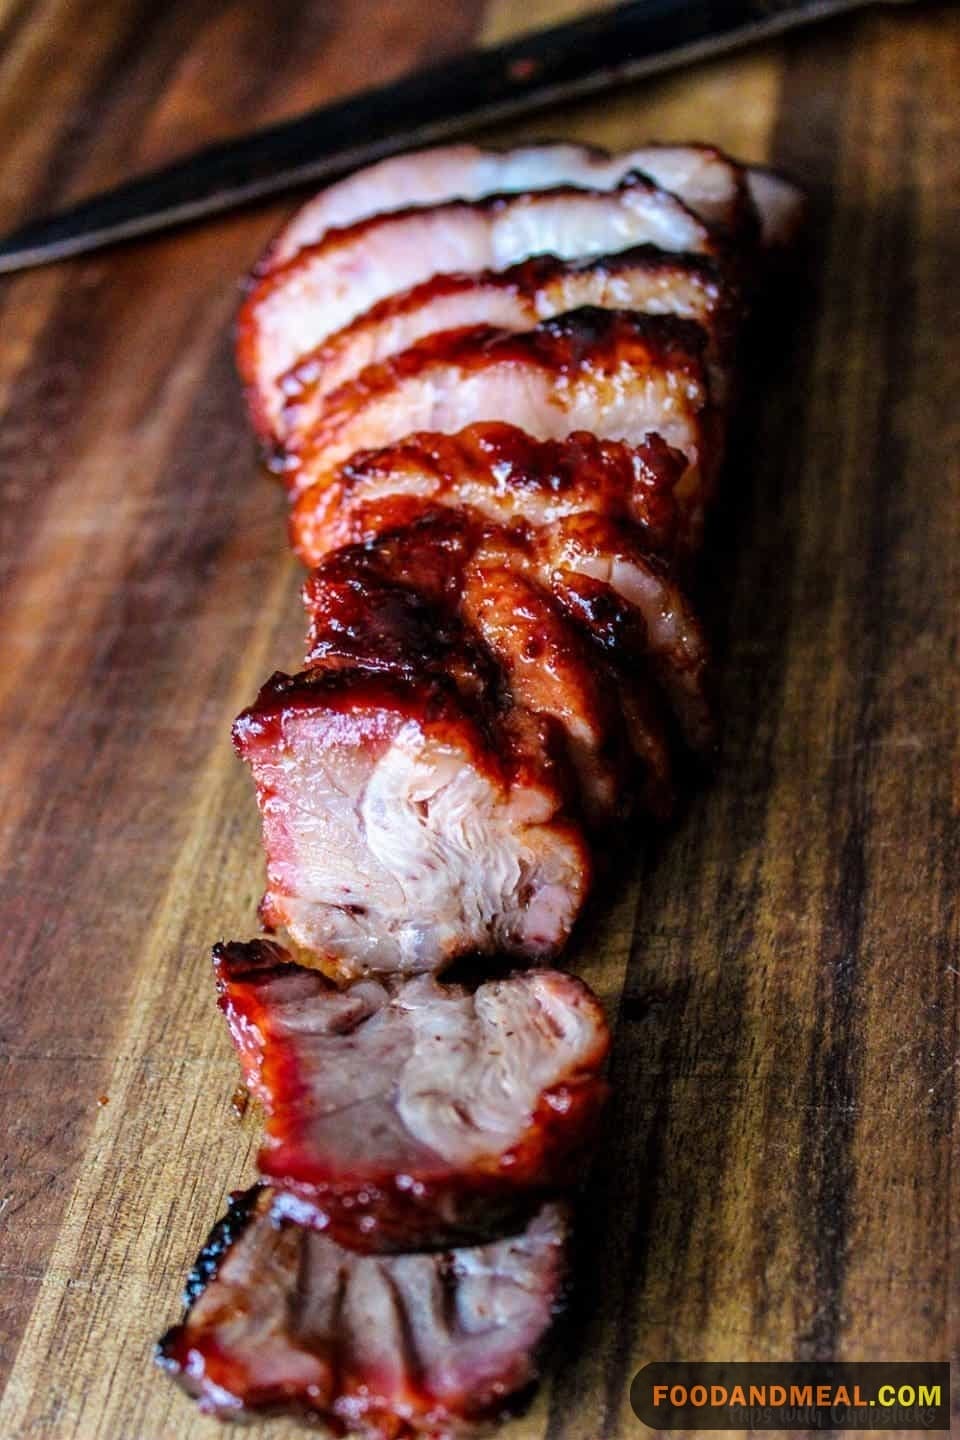 The Elegant Presentation Of Char Siu Pork, Featuring Its Distinct Dark Black Outer Layer And Contrasting White Inner Meat.